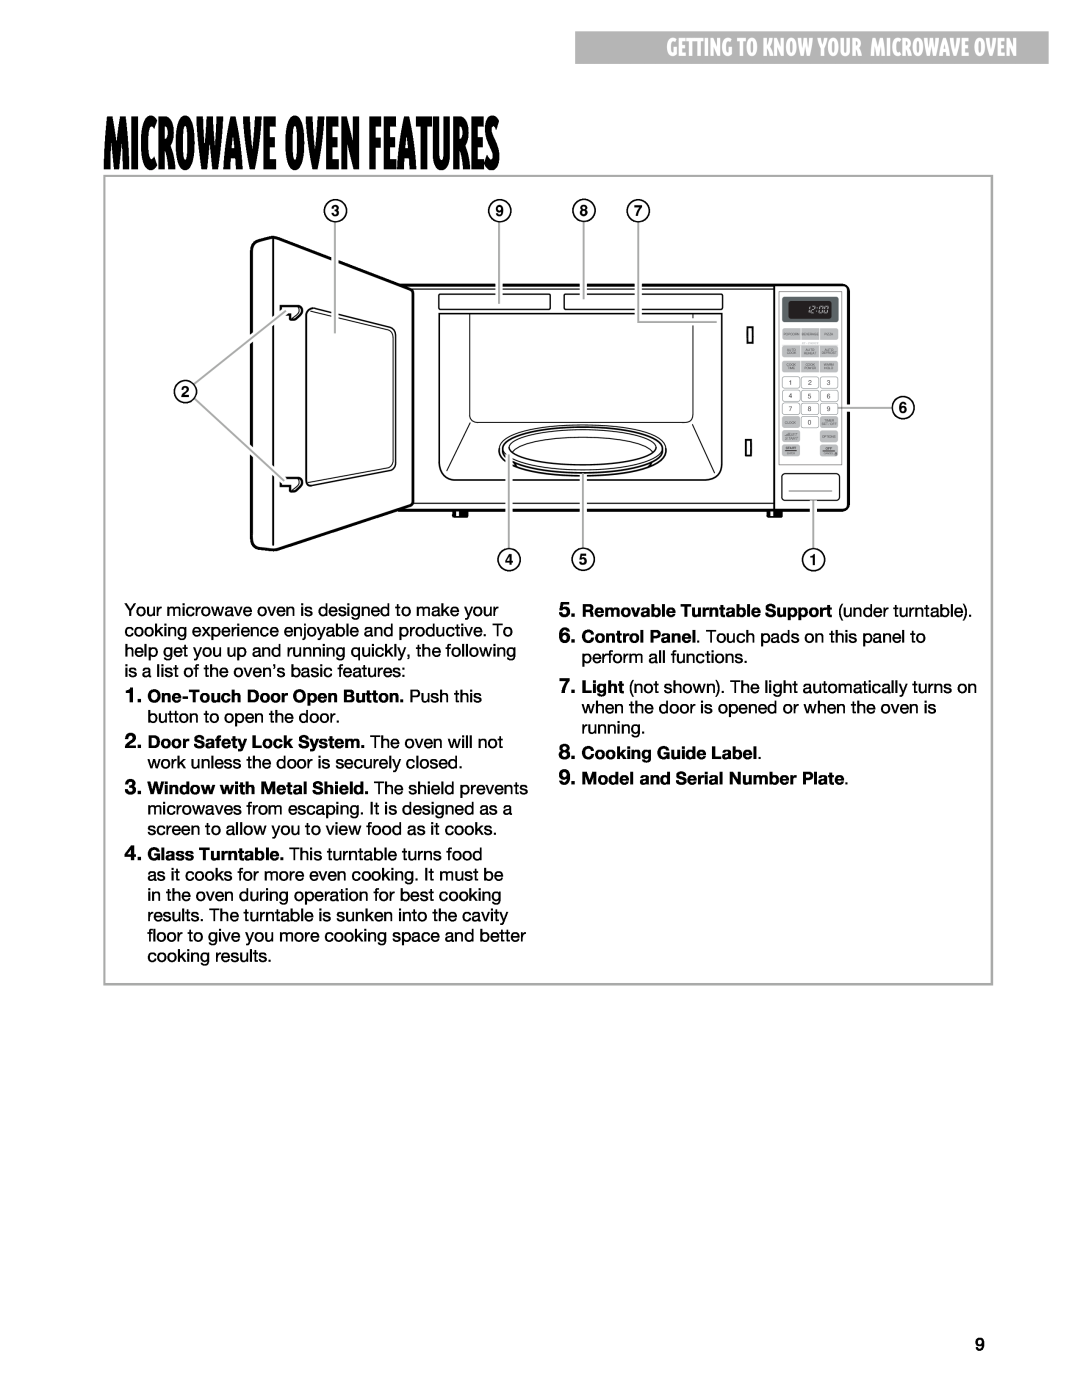 Whirlpool MT4110SK installation instructions Microwave Oven Features, Getting To Know Your Microwave Oven 